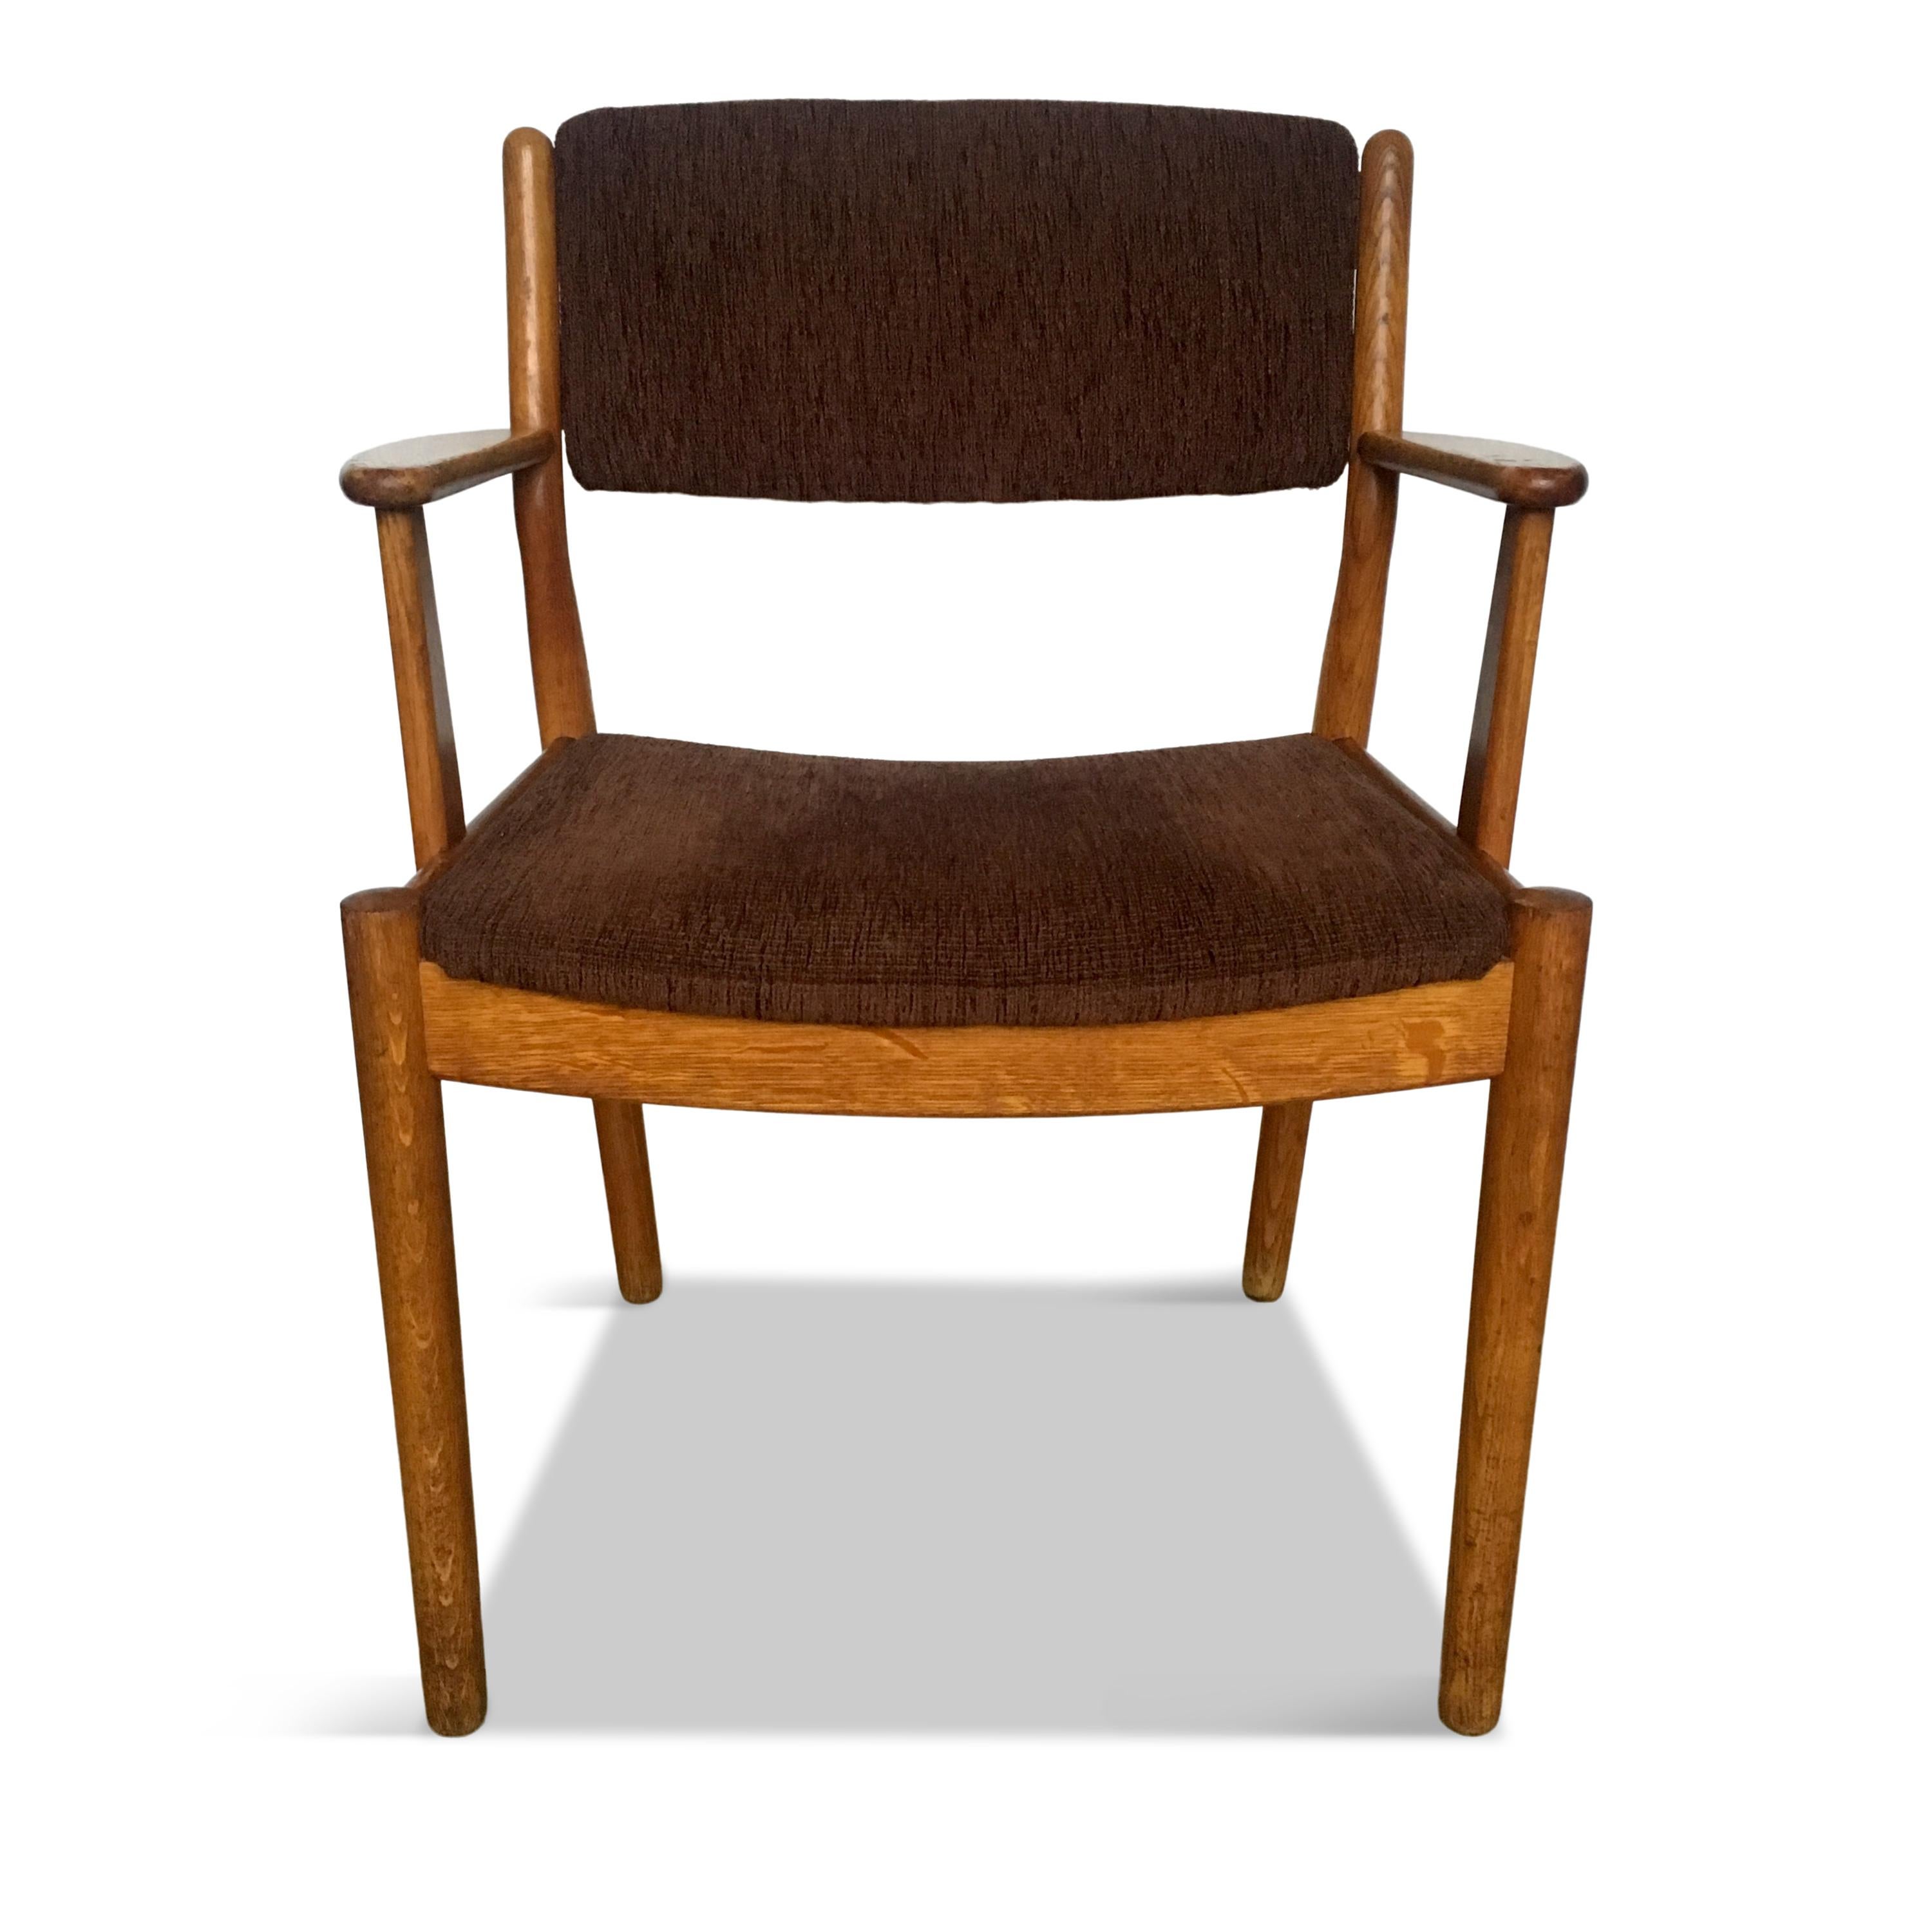 Midcentury Danish Oak Armchair by Poul Volther for FDB Møbler, 1950s (Stoff) im Angebot